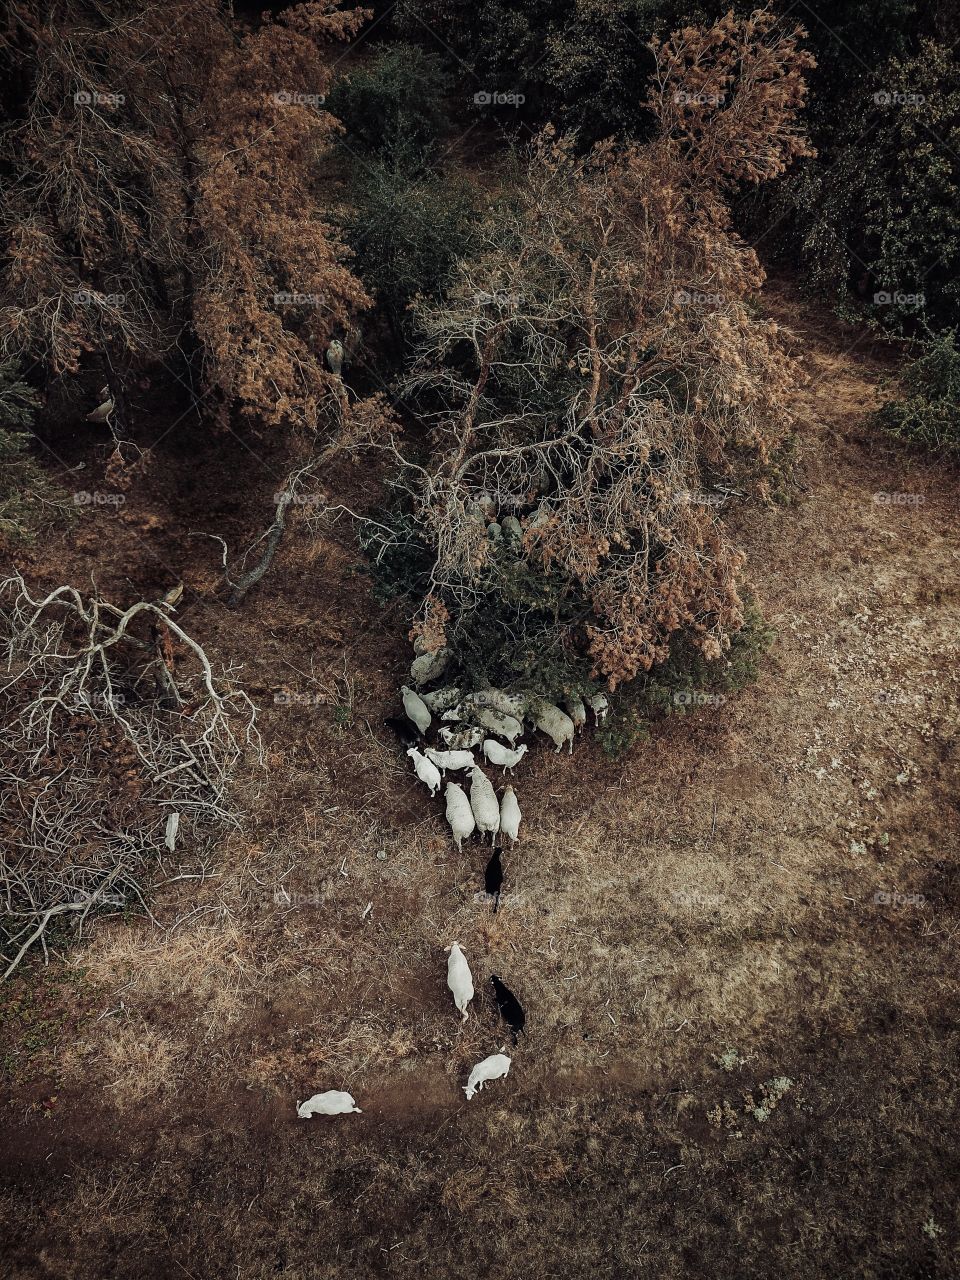 A flock of sheep from above. 